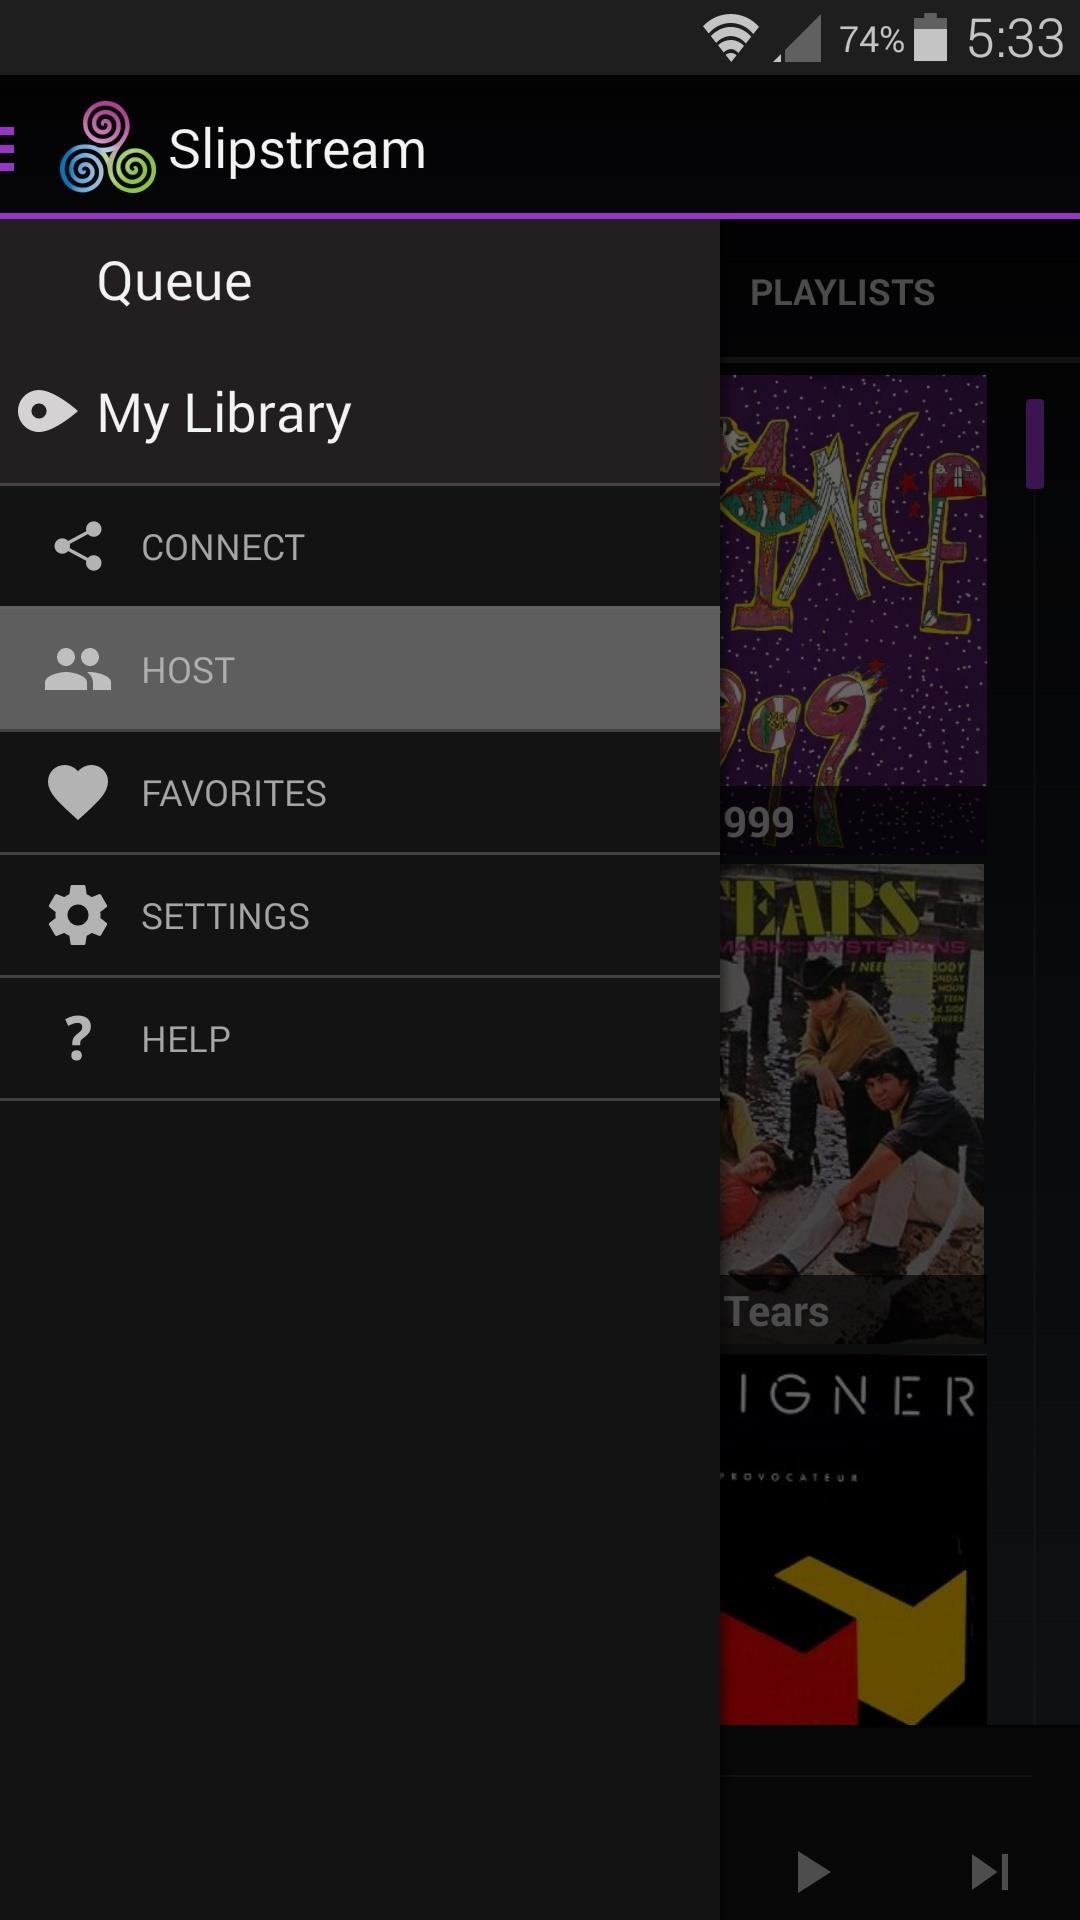 How to Share Your Android's Music Library with All of Your Friends